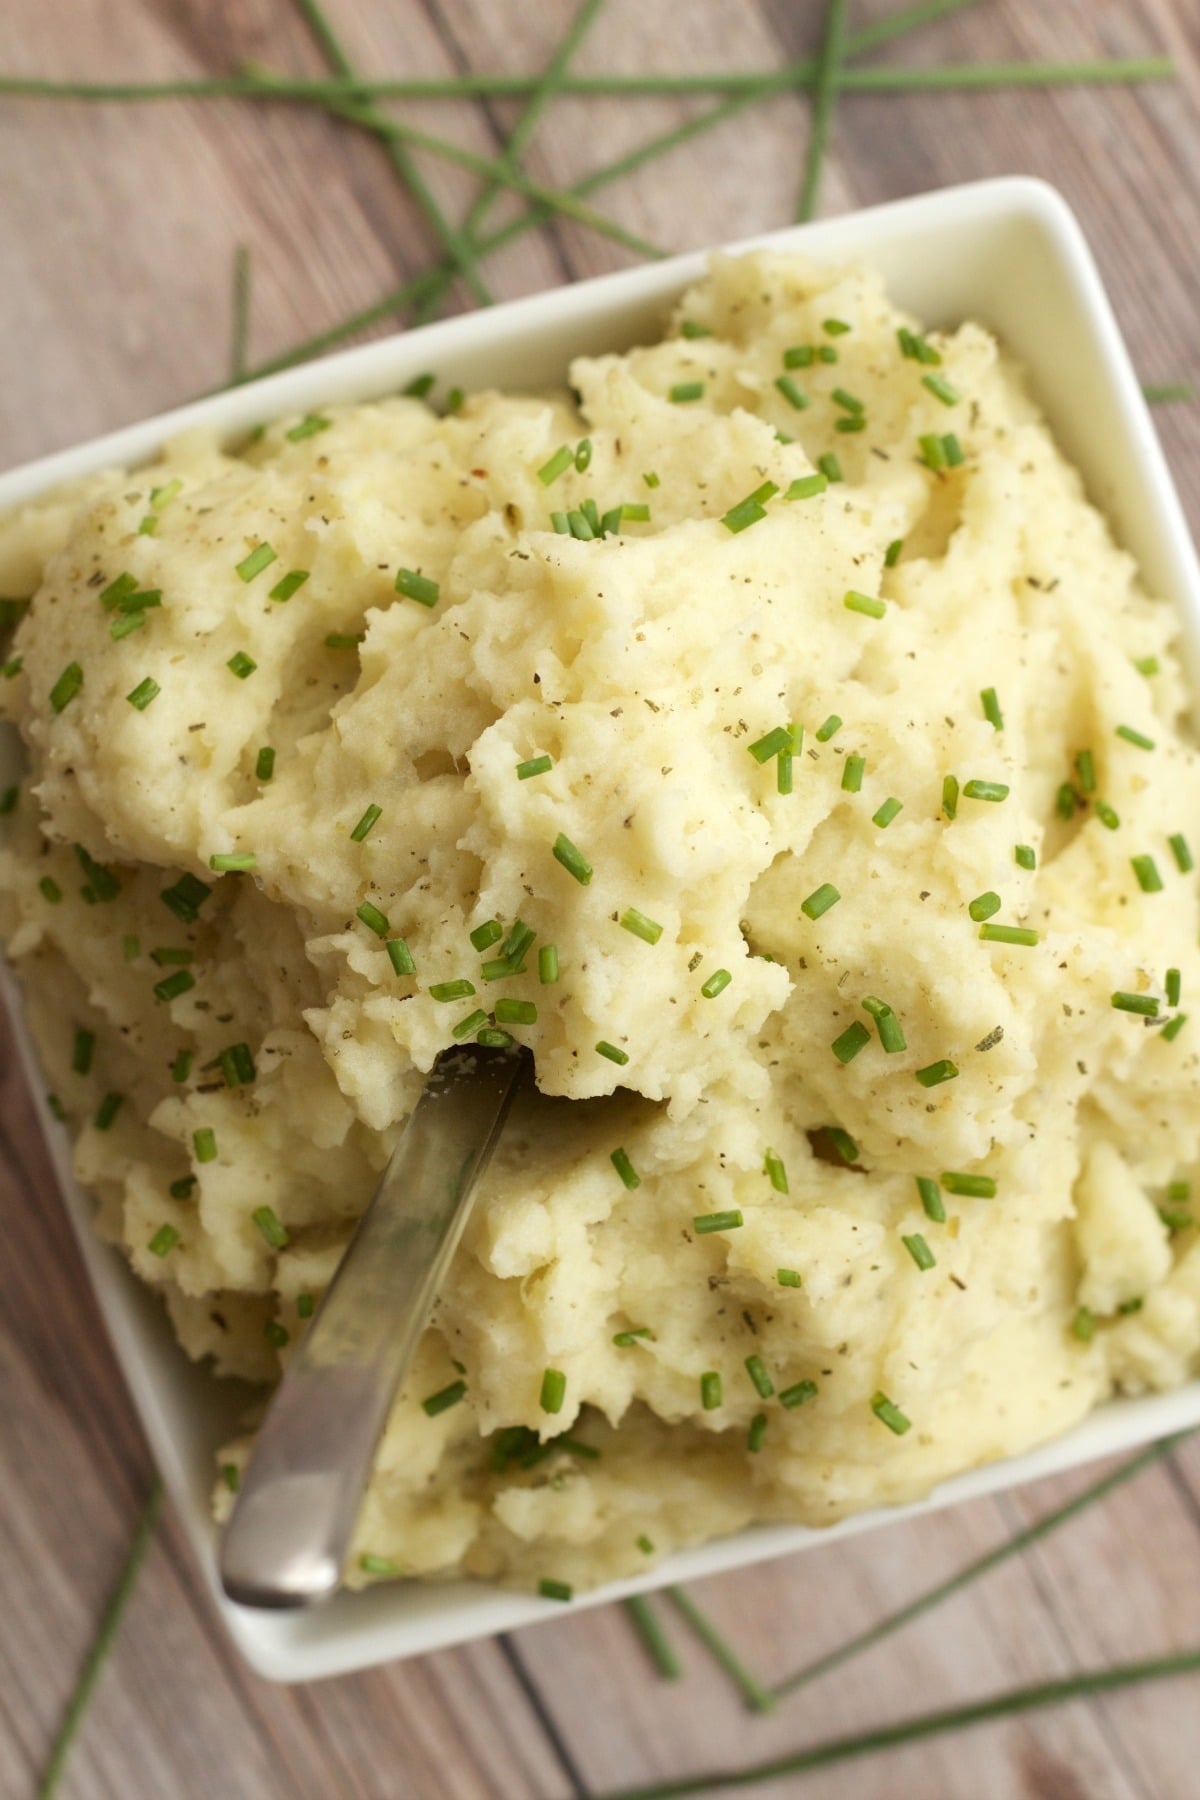 Dry Mashed Potatoes Wallpapers High Quality | Download Free